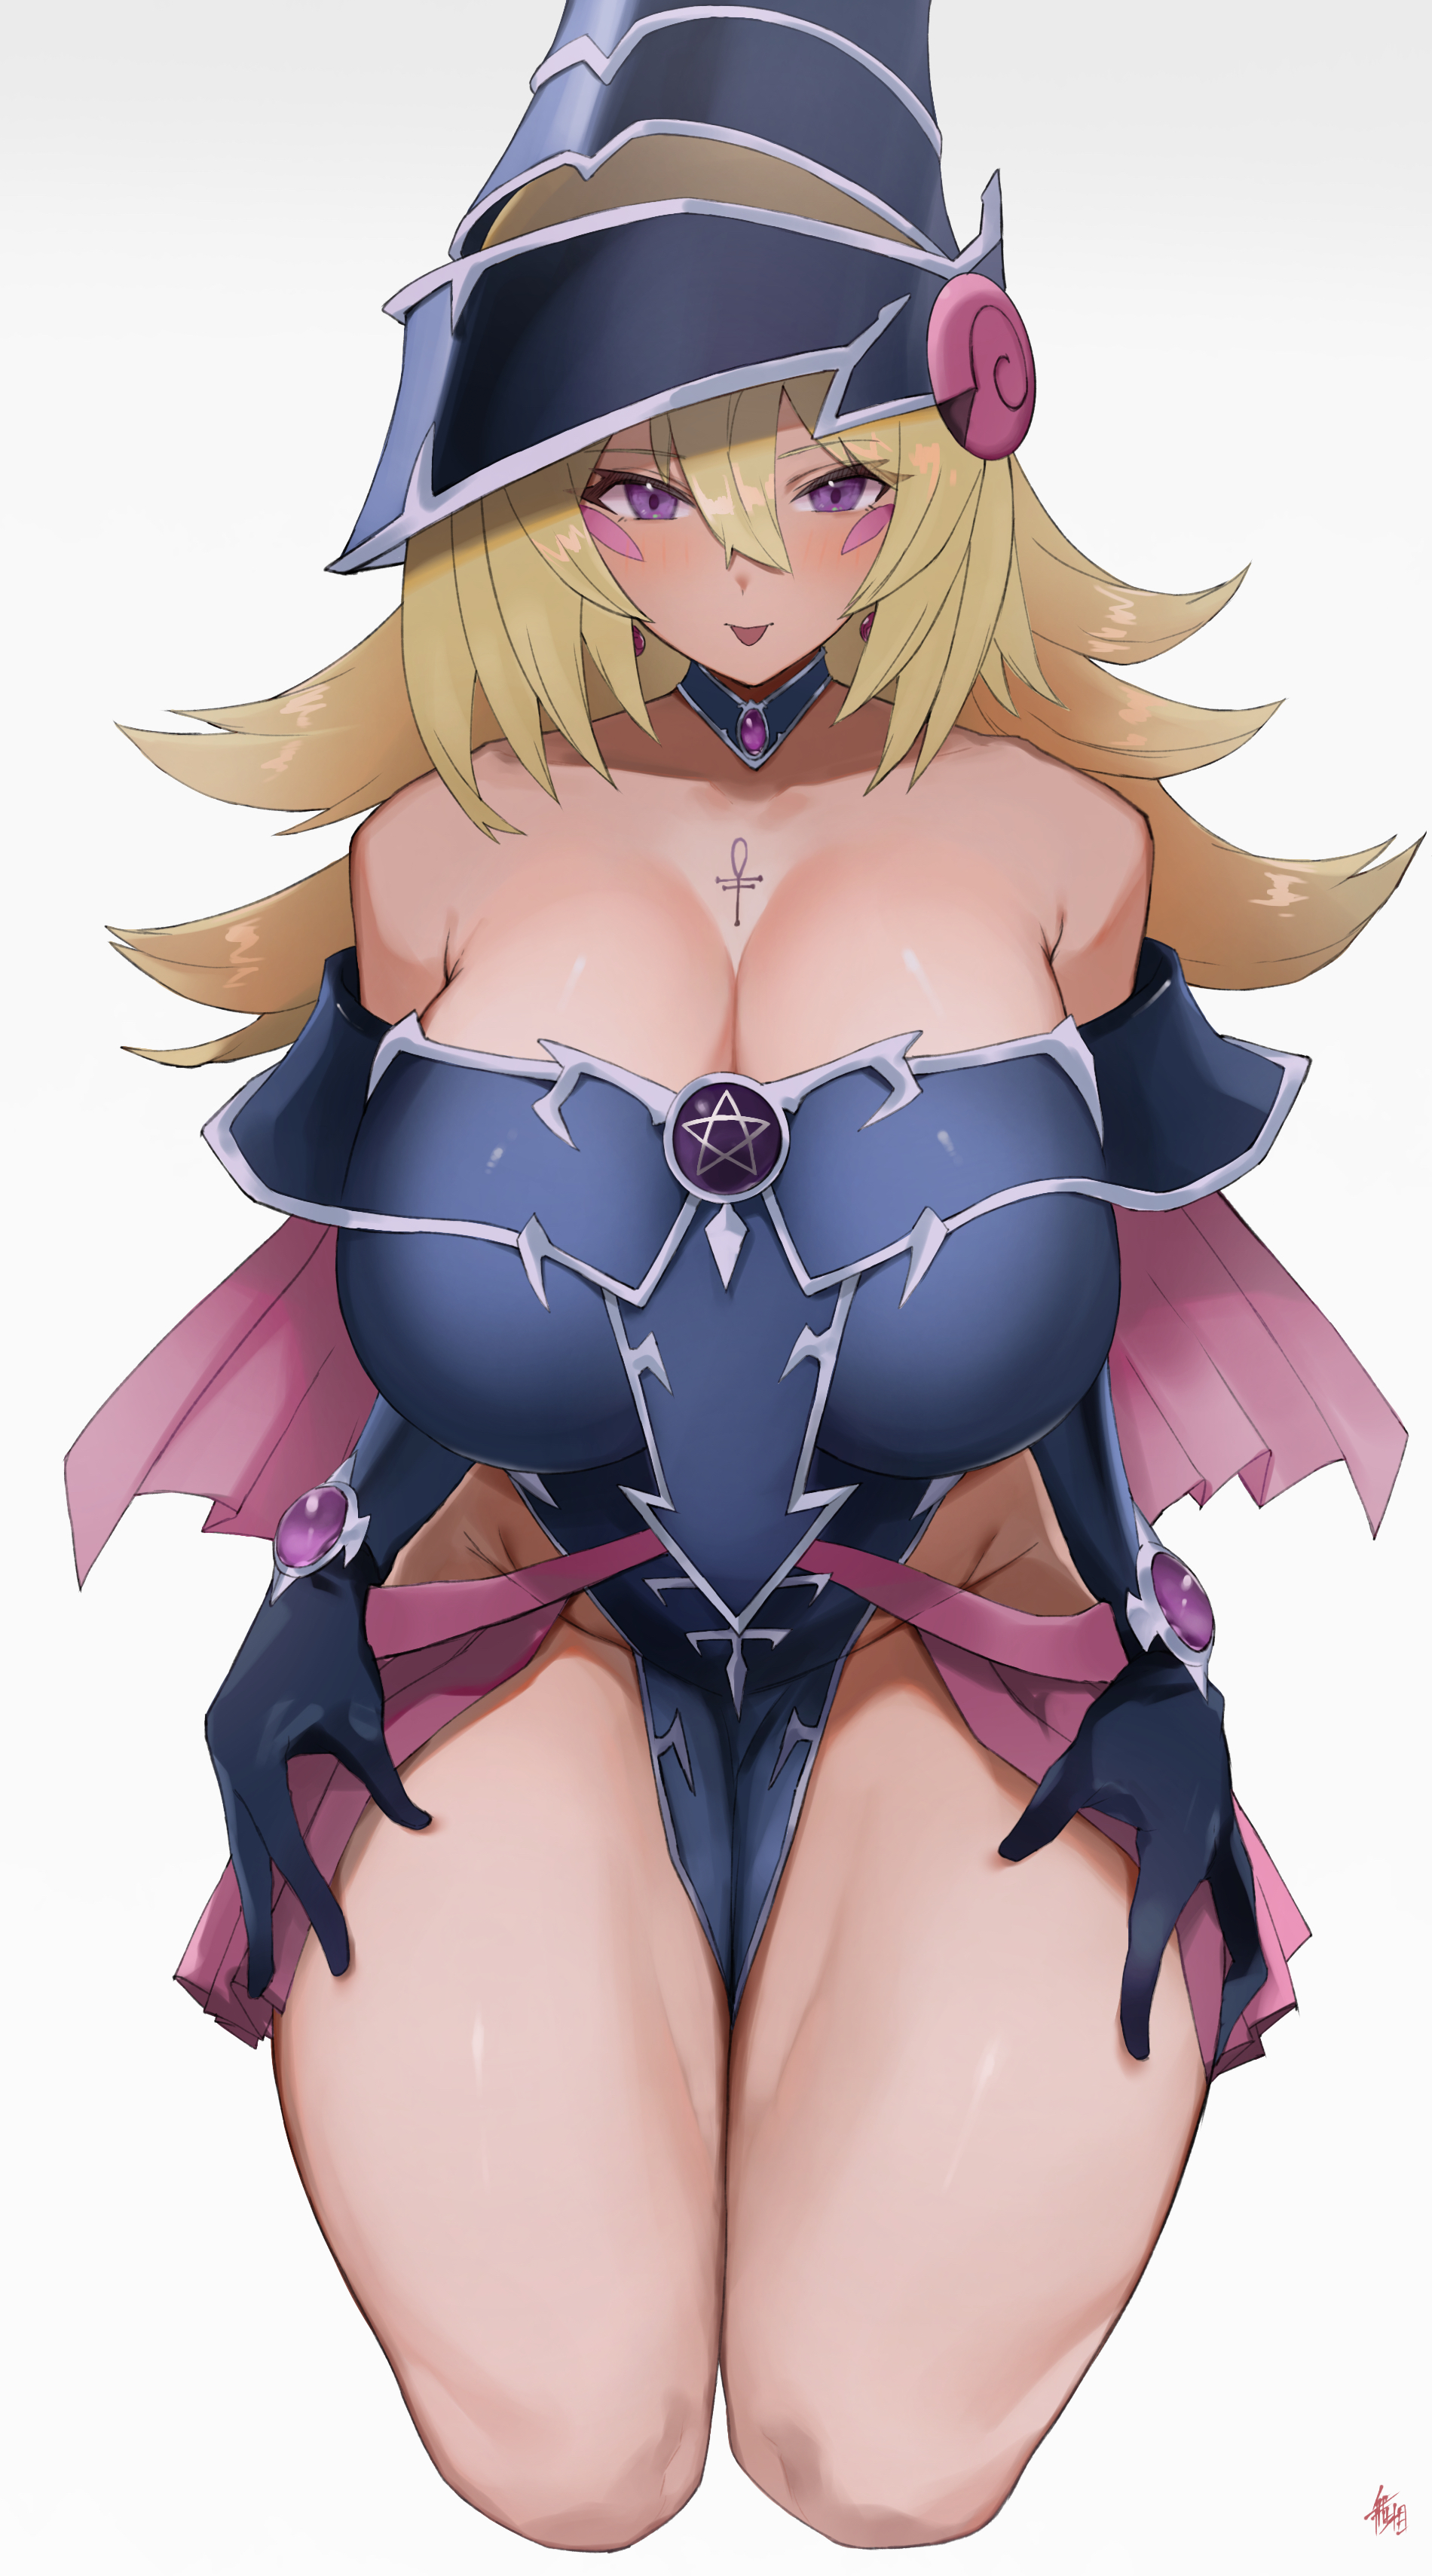 Anime 1900x3418 anime anime girls Magi Magi ☆ Magician Gal Yu-Gi-Oh! Trading Card Games blonde long hair artwork fan art cleavage big boobs thighs boobs huge breasts thighs together curvy white background